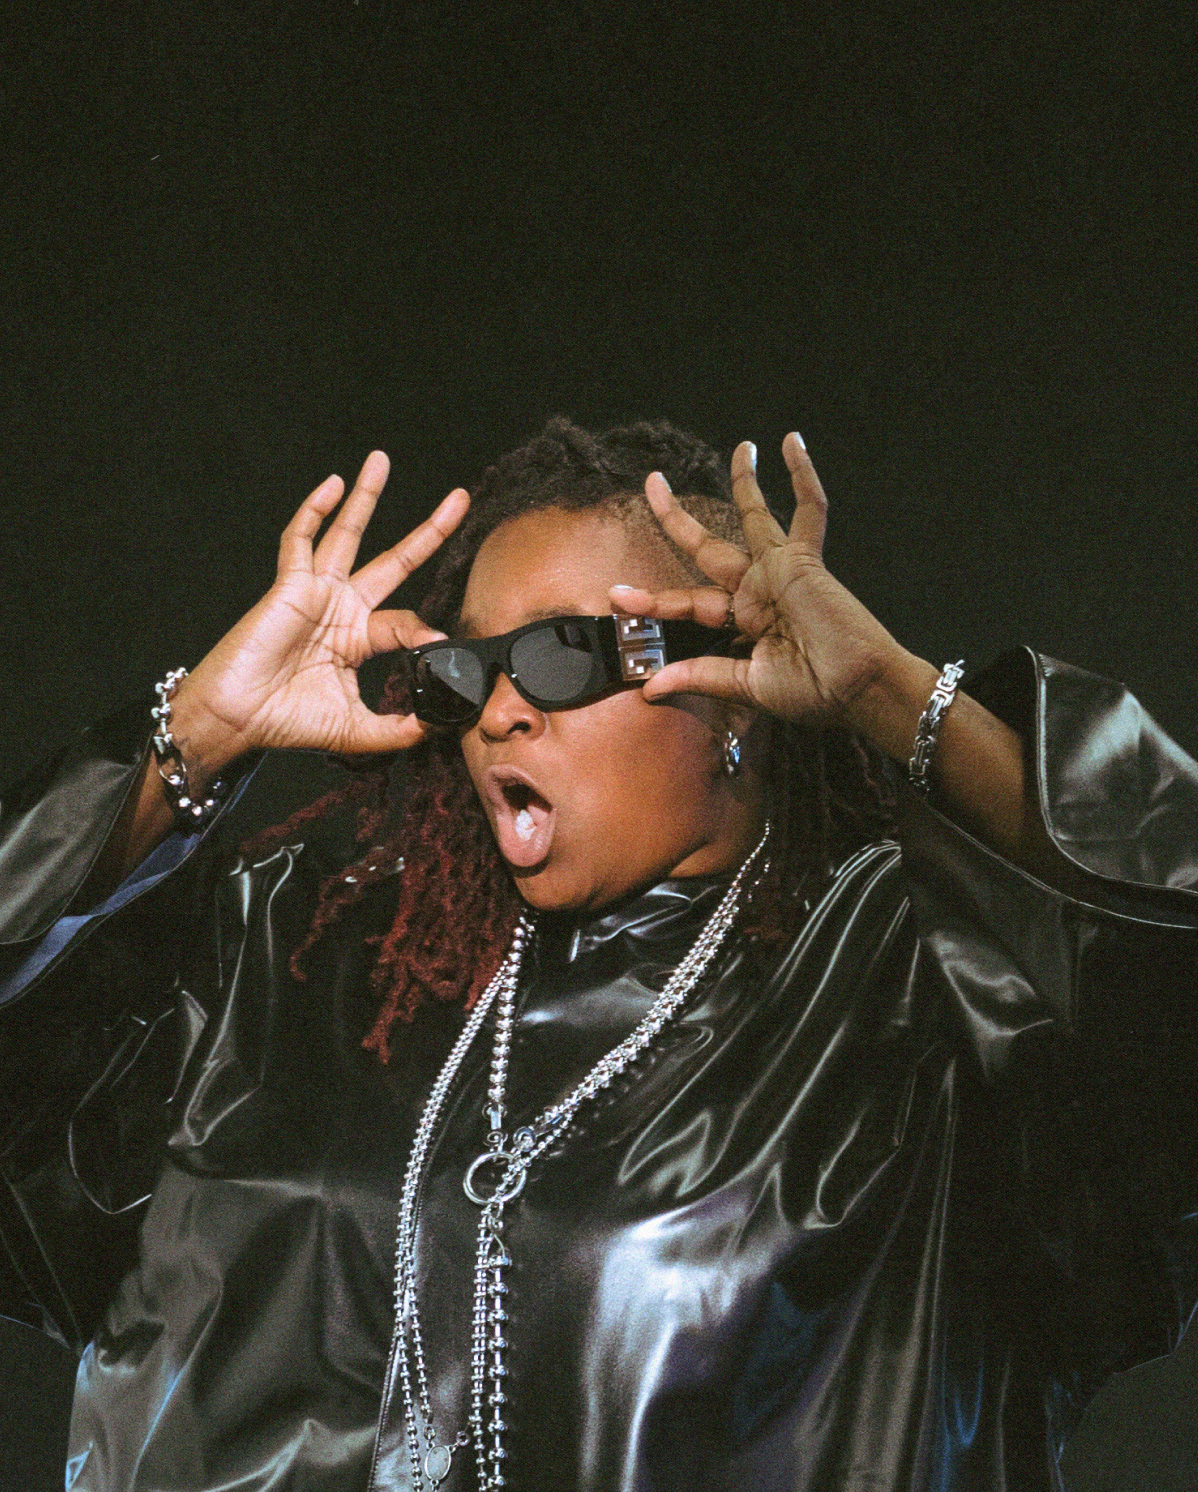 A person with long braids poses dramatically against a dark background, wearing black sunglasses and a shiny, oversized black jacket. They accessorize with multiple silver chains, bracelets, and rings, and their mouth is open in an expressive manner.